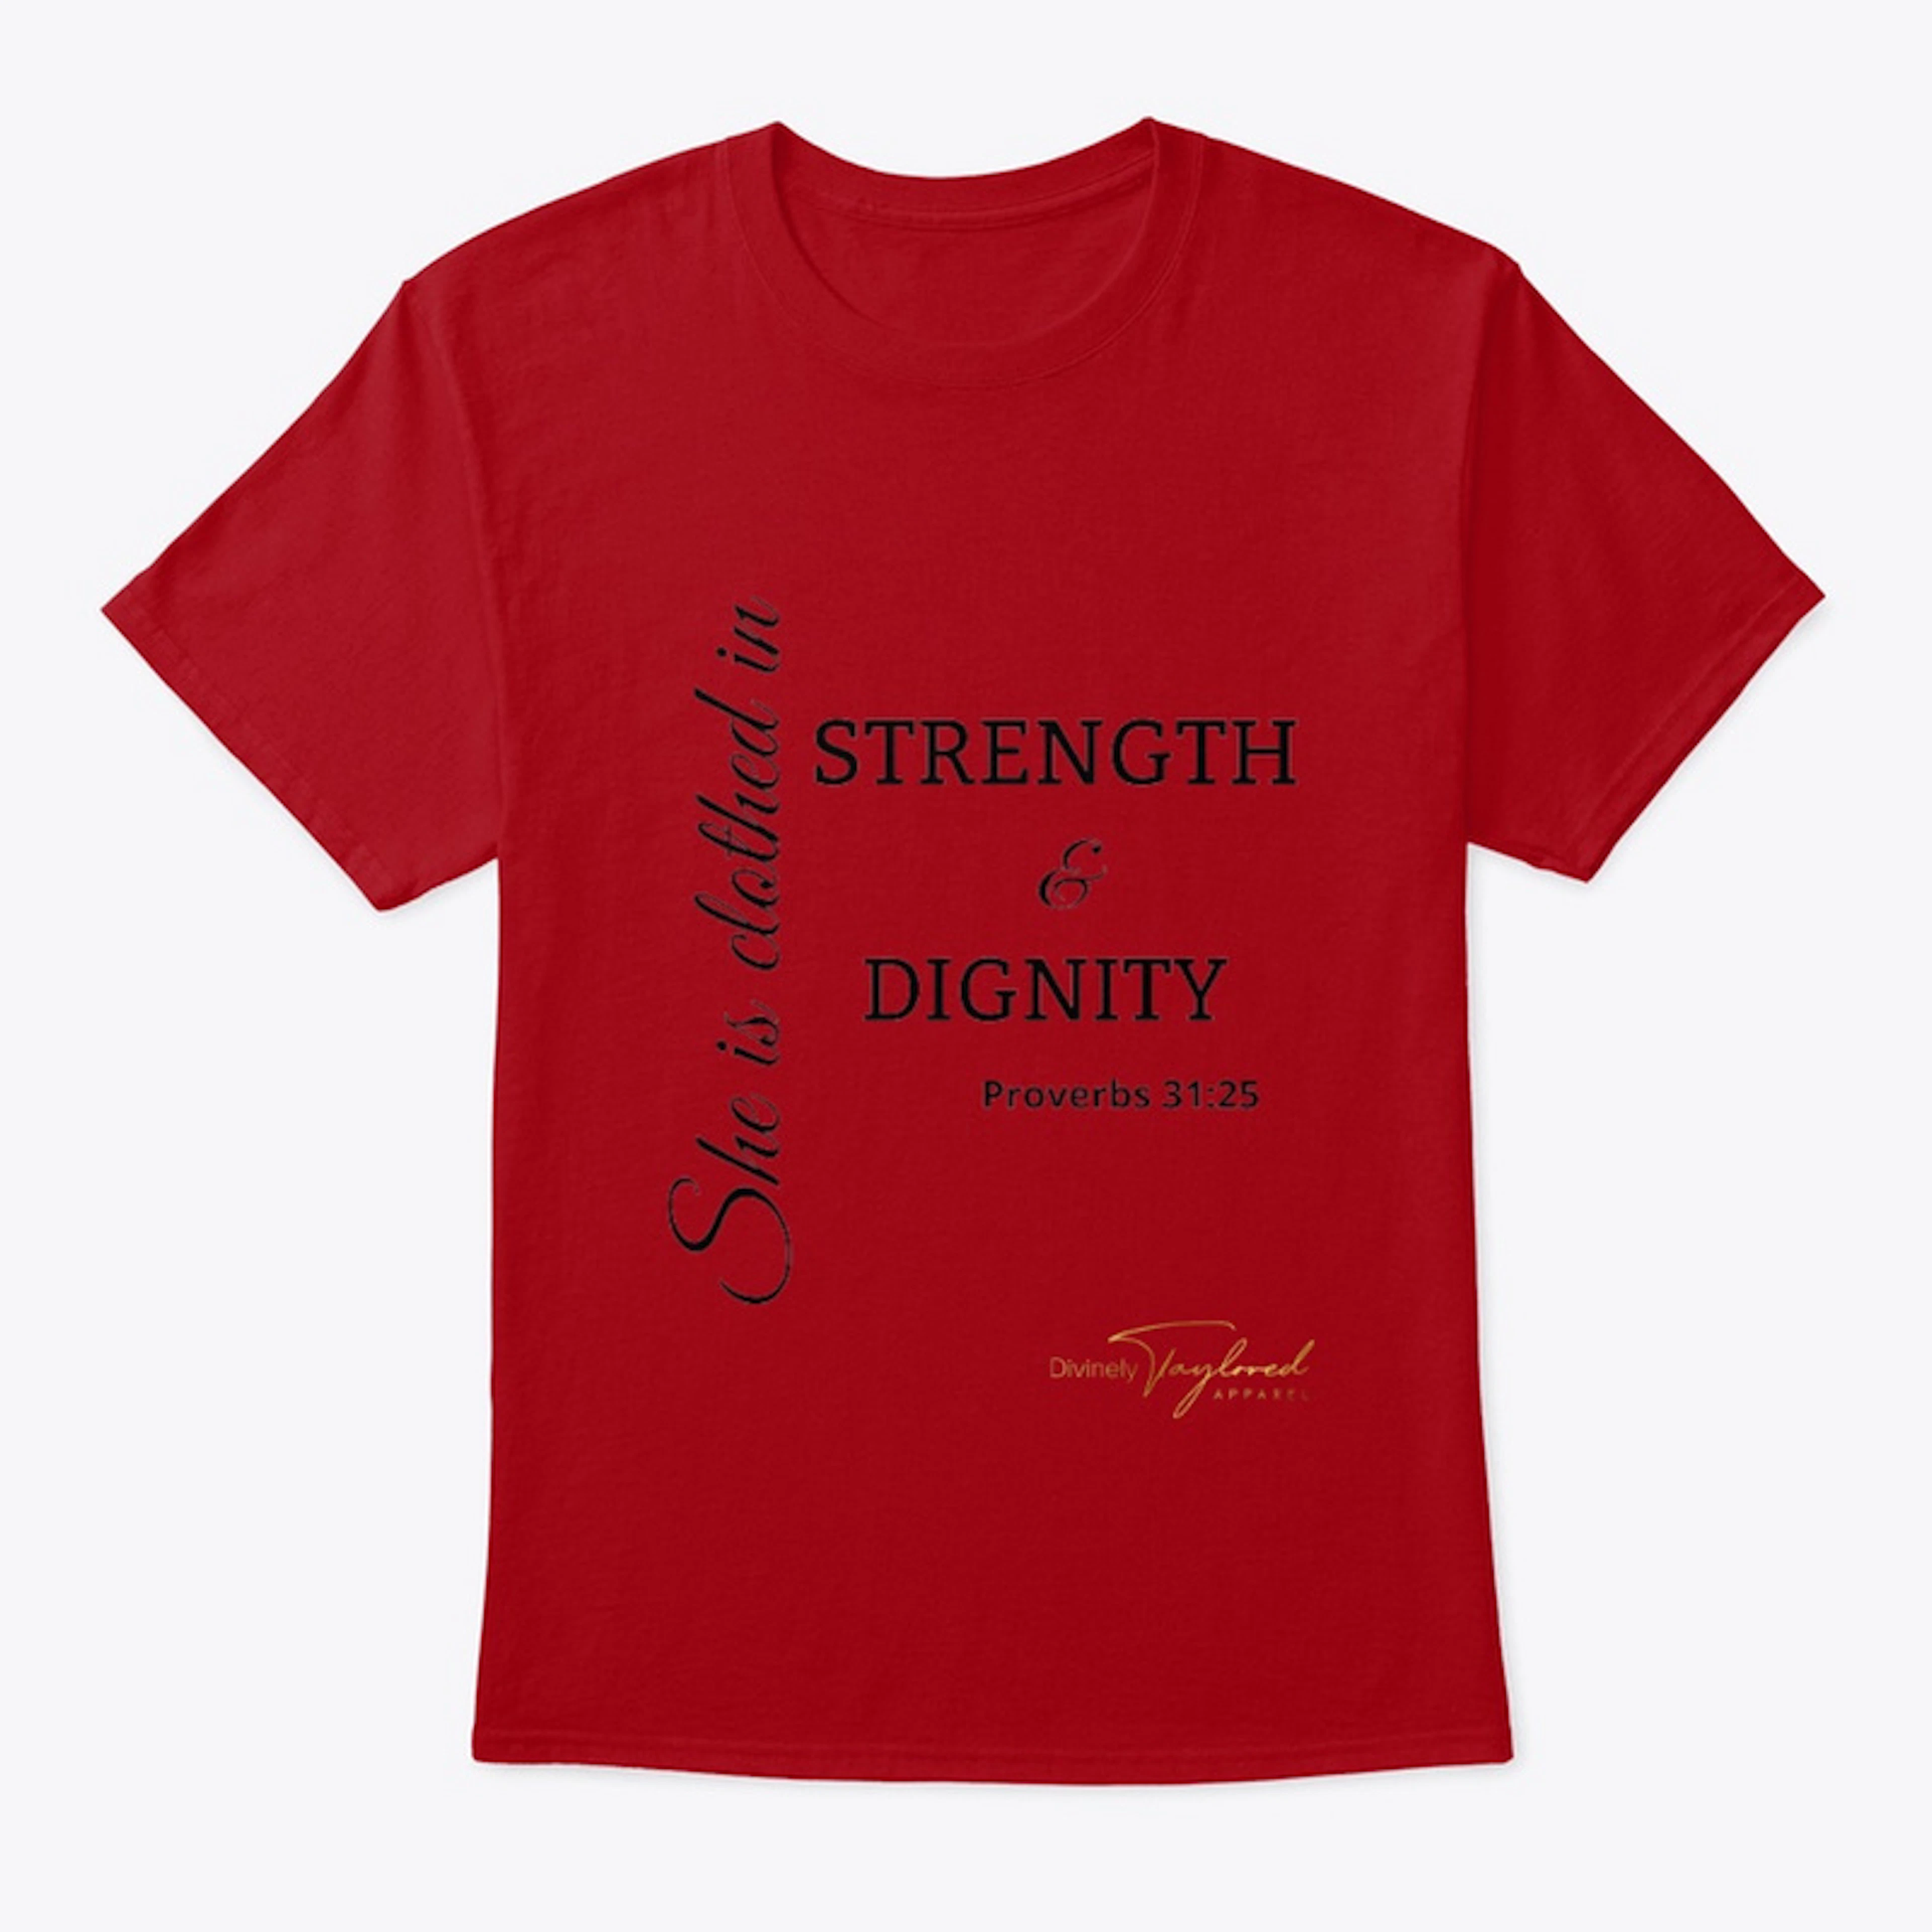 Proverbs 31:25 Strength & Dignity Shirt